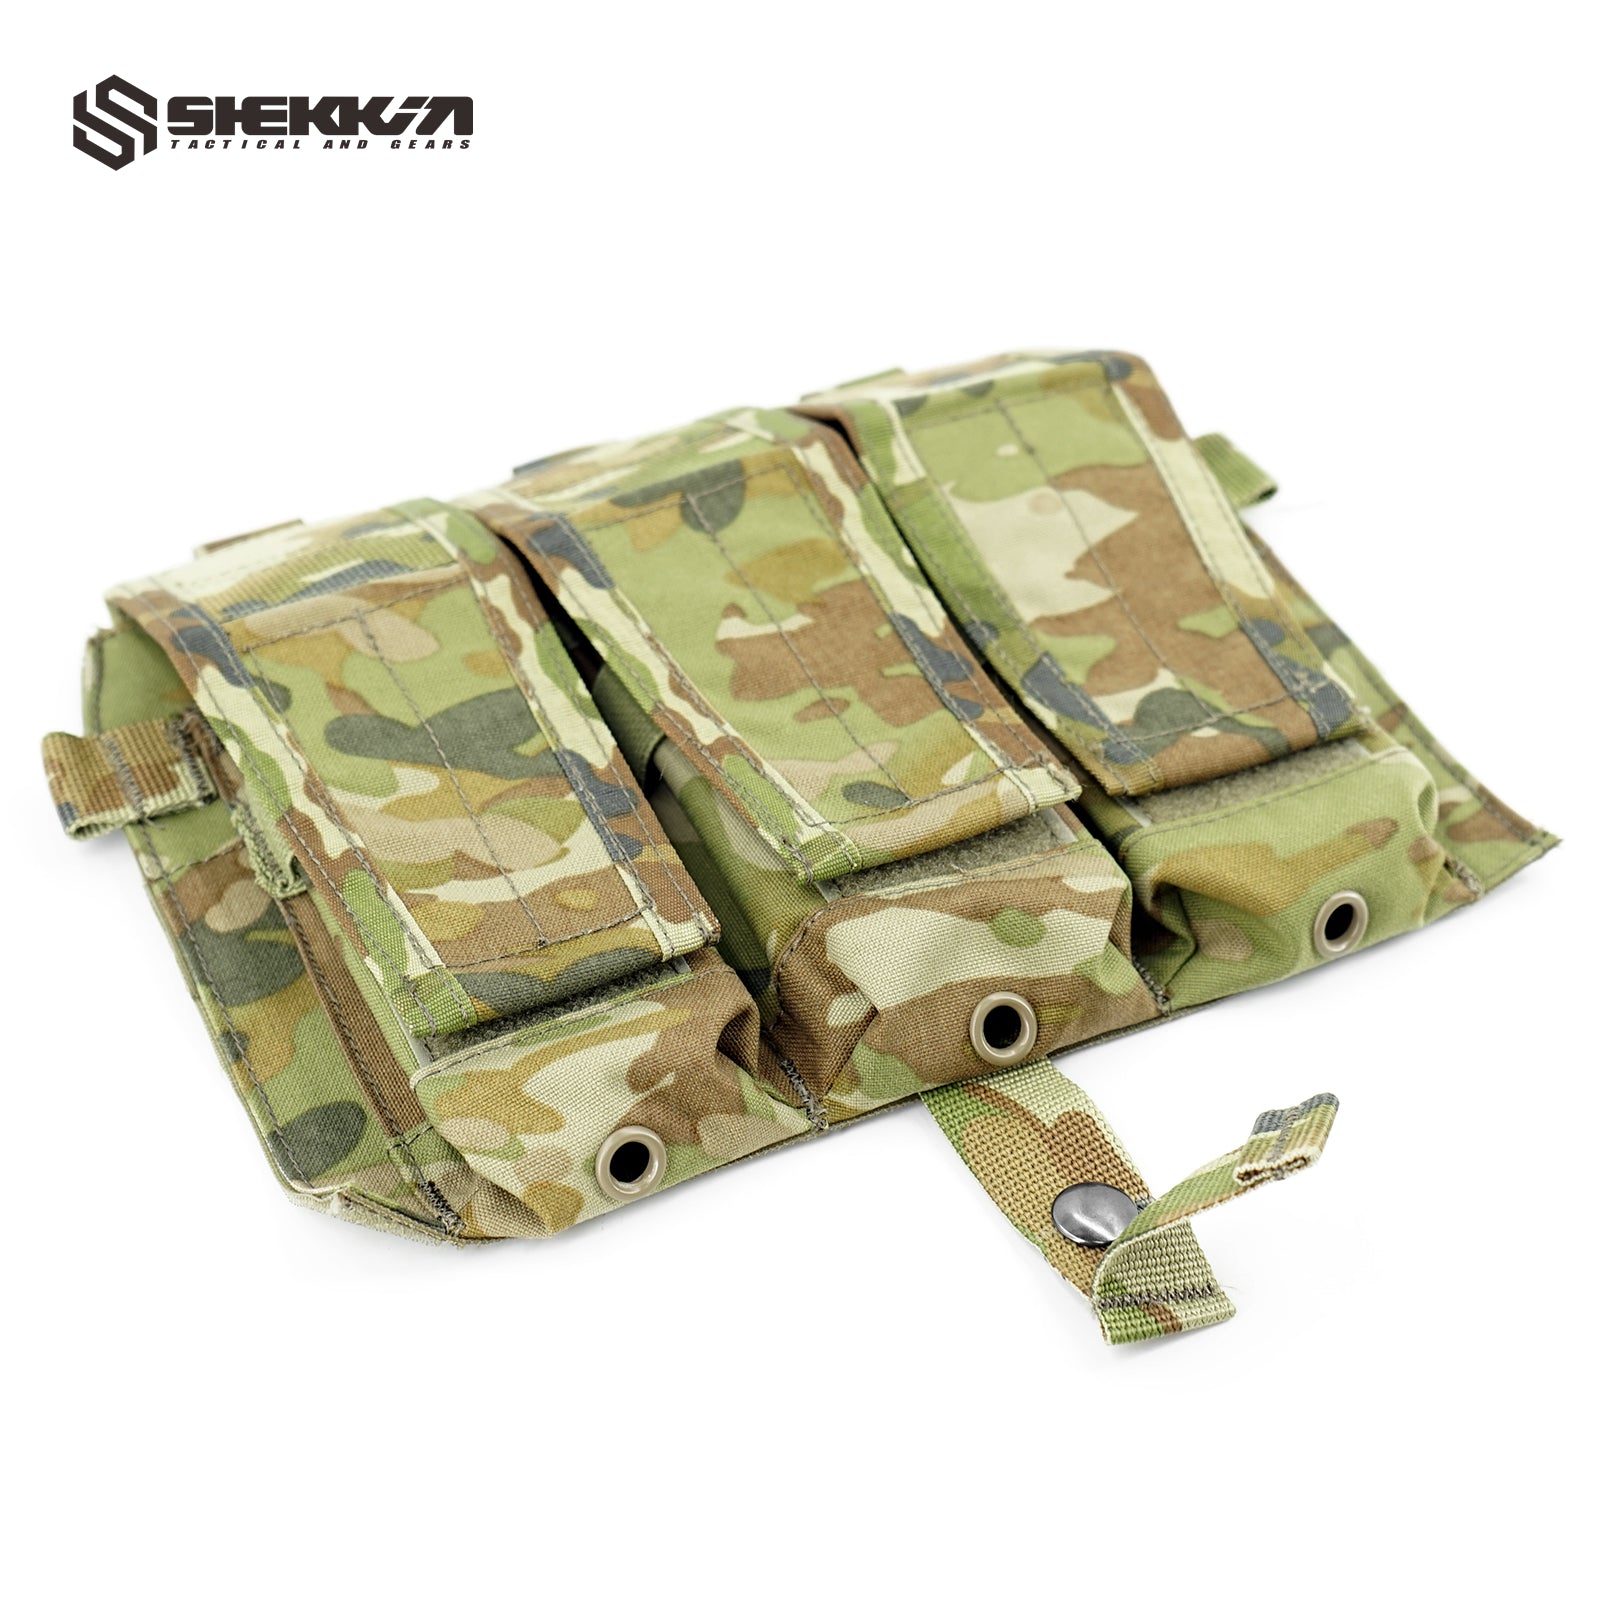 CP style AMCU Triple Rifle Mag Pouch for T5 - Shekkin Gears